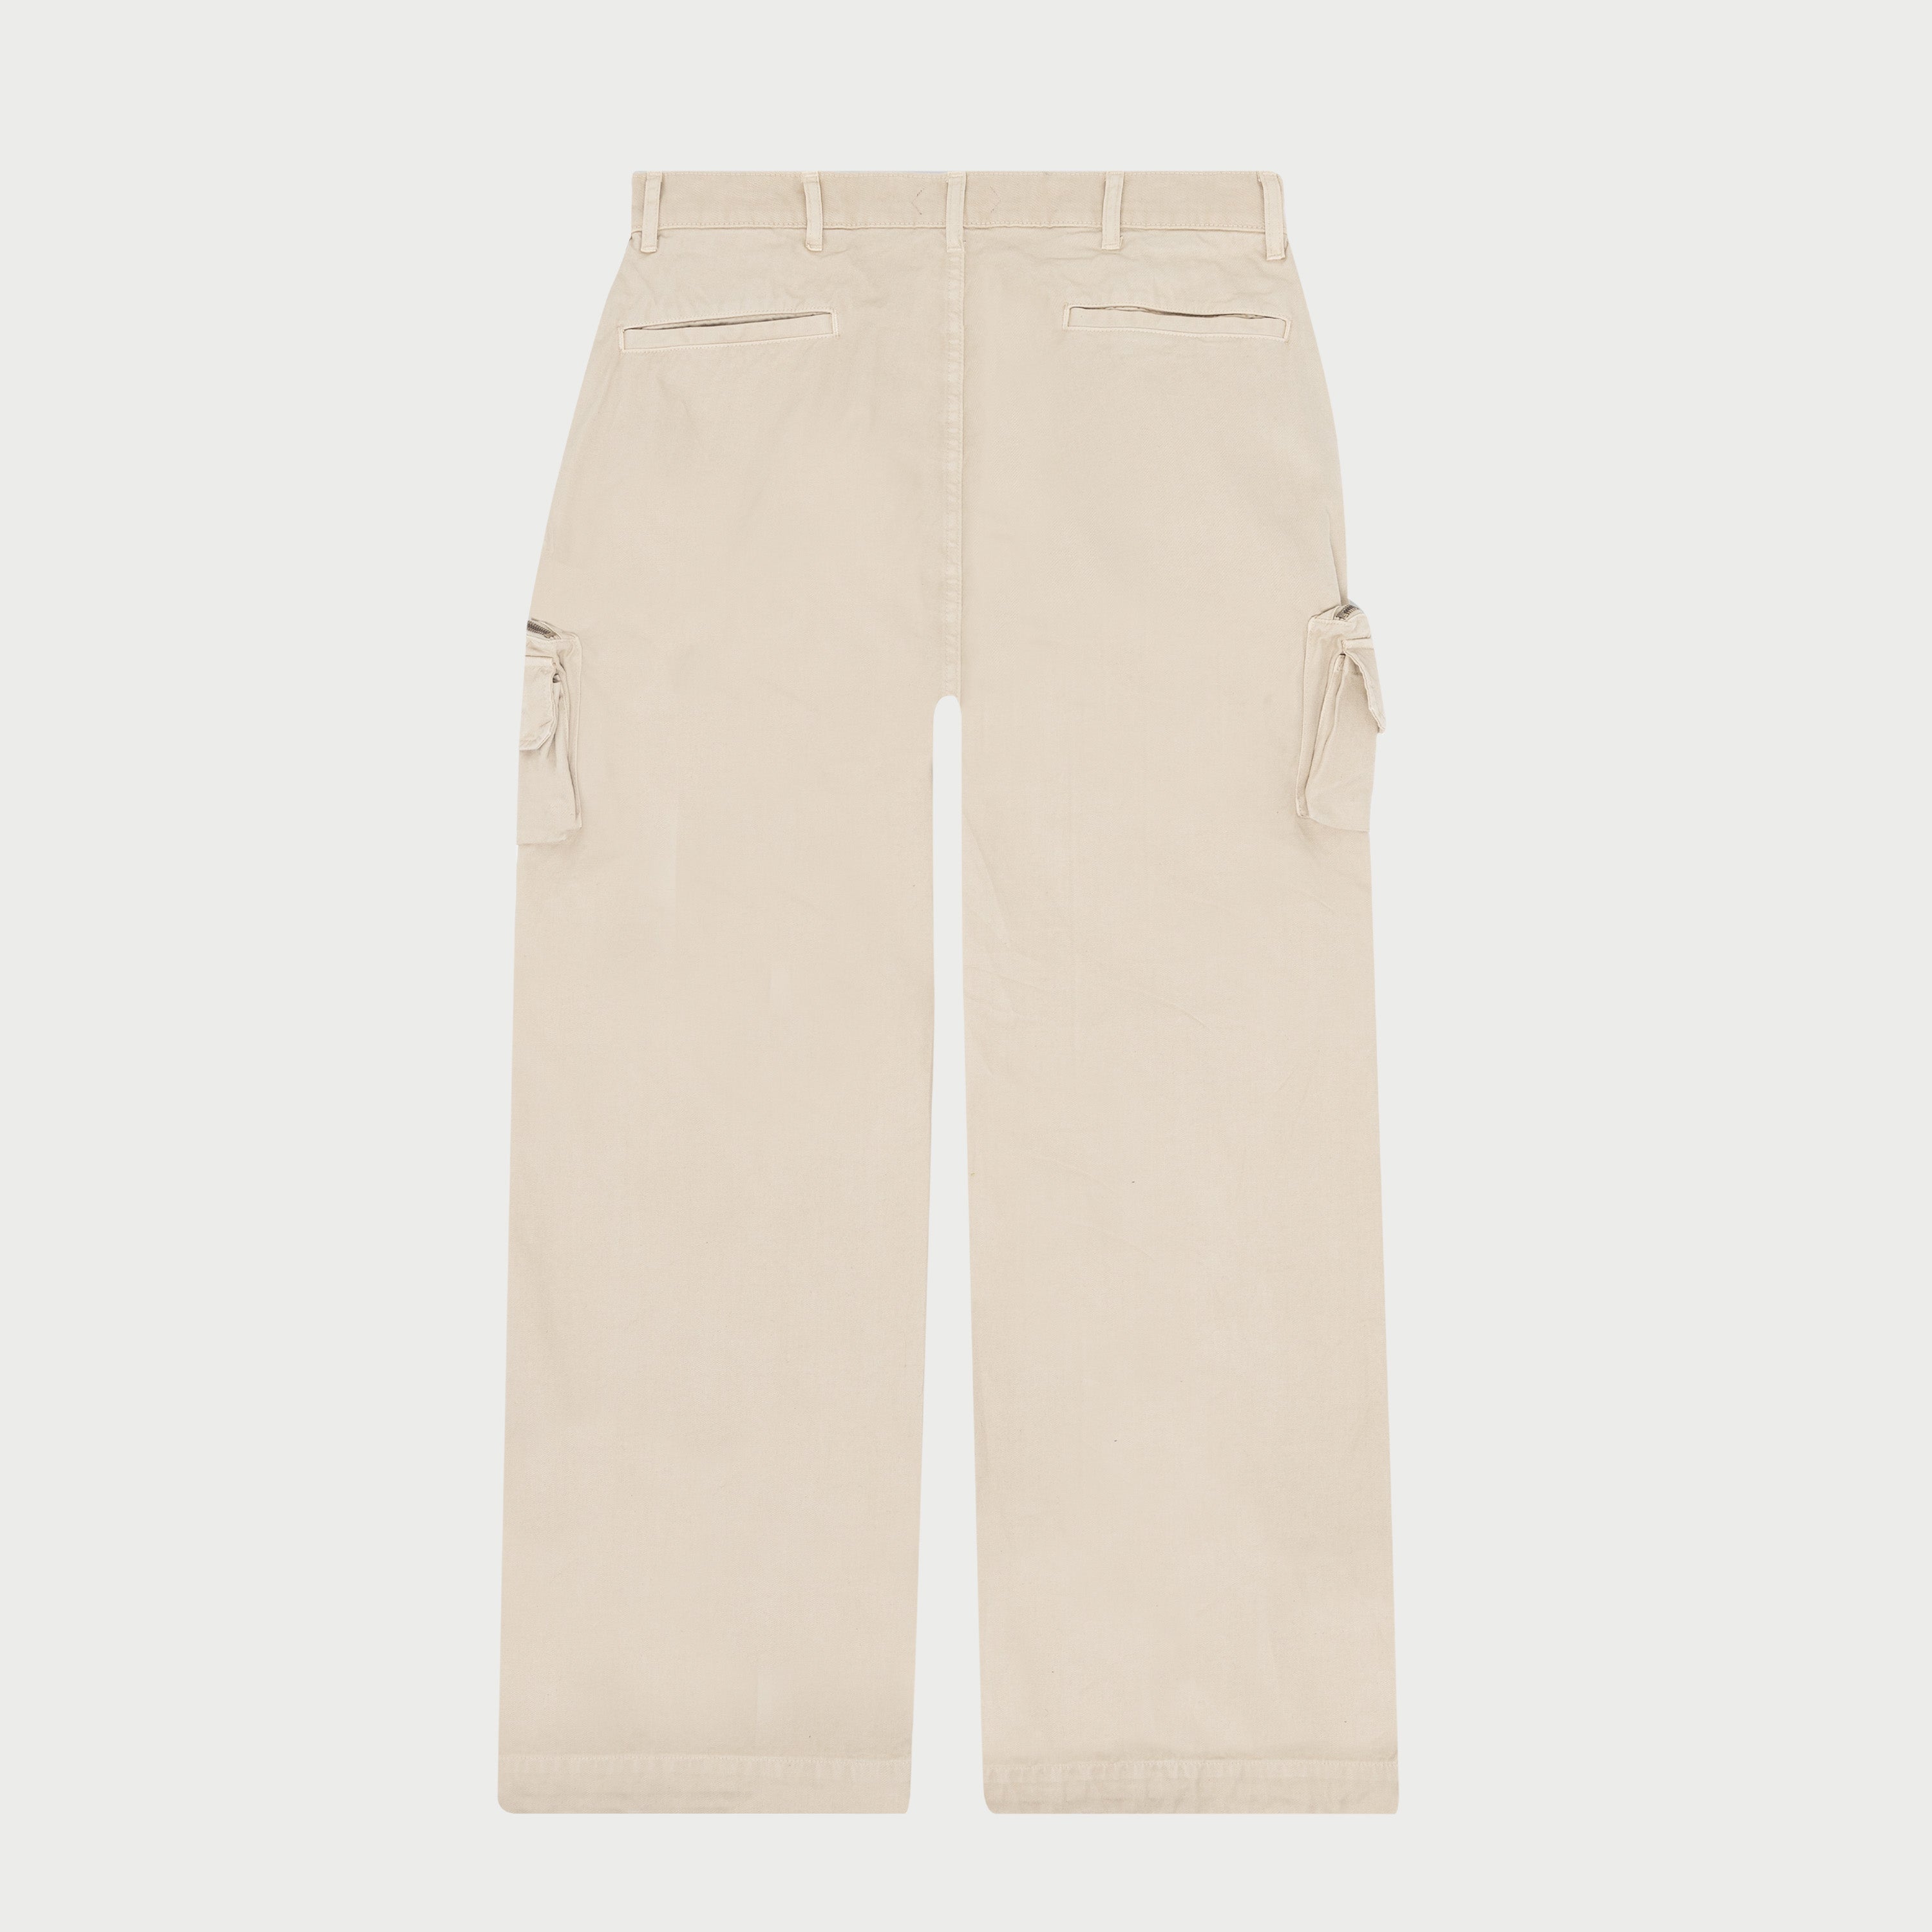 South Bay Printed Utility Cargo Pants